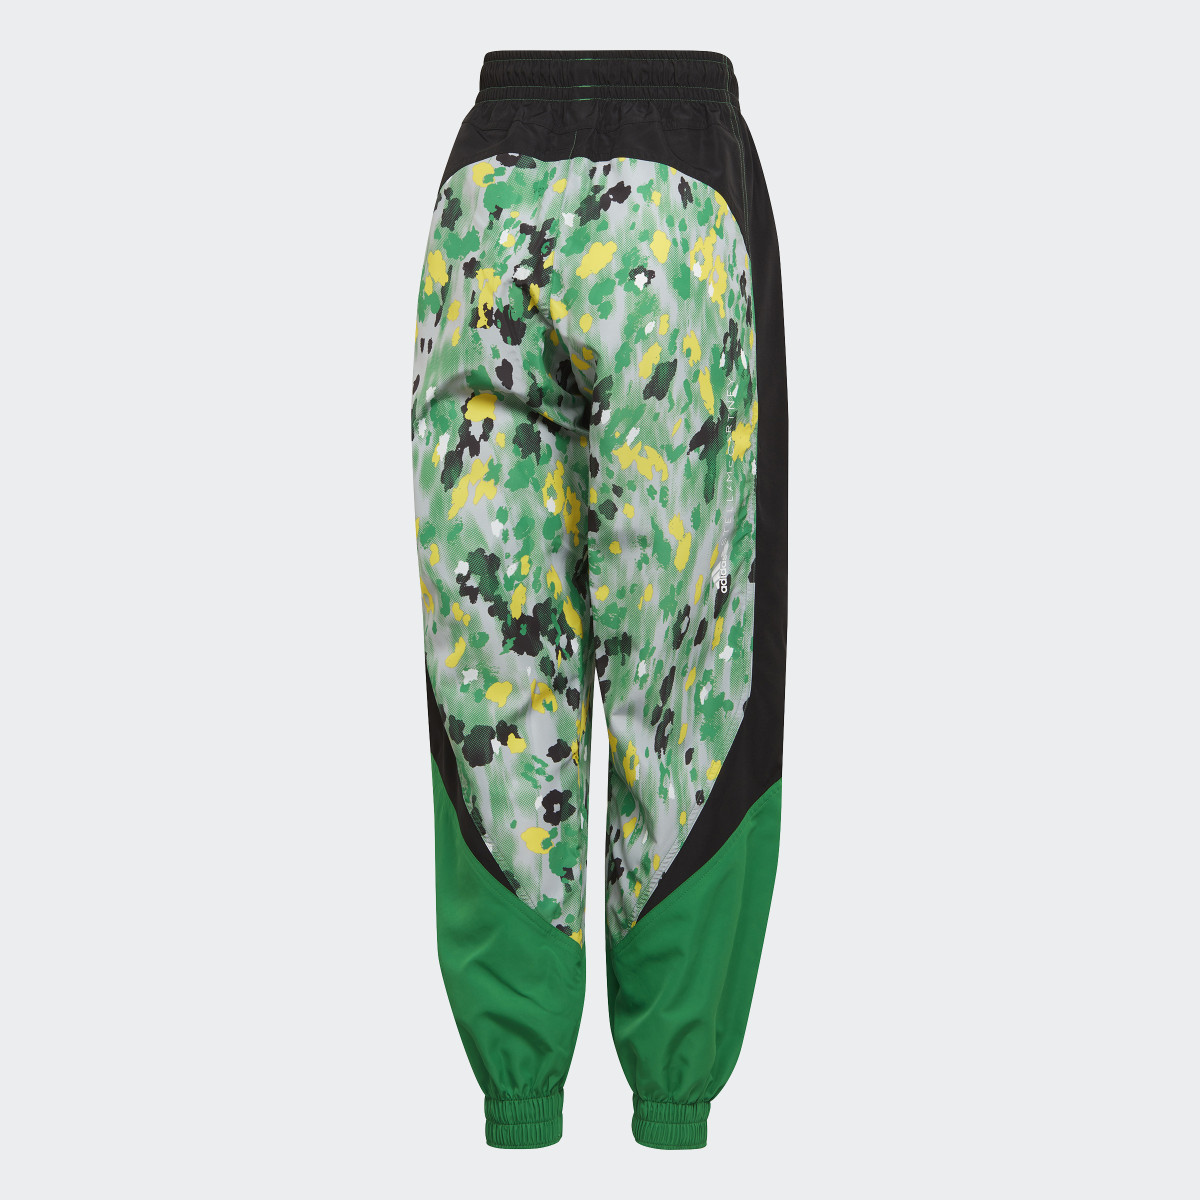 Adidas by Stella McCartney Printed Woven Tracksuit Bottoms. 8